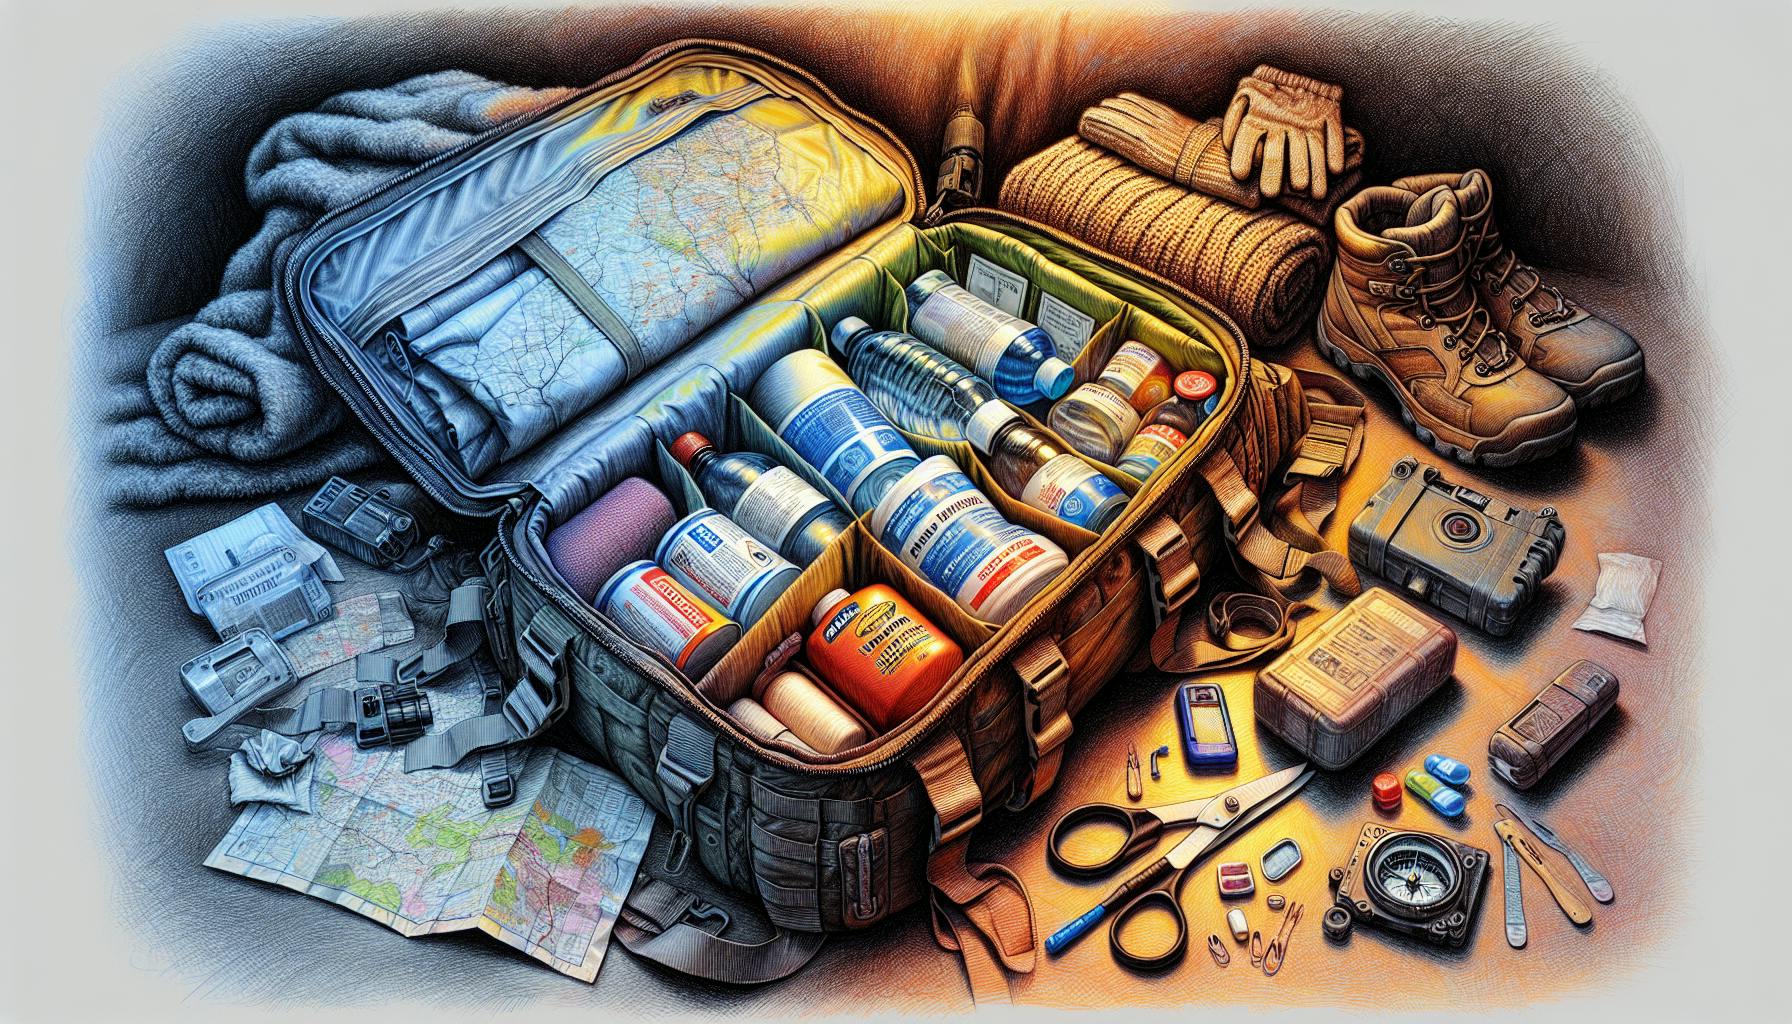 Go Bag Emergency Kit Essentials for the Unexpected